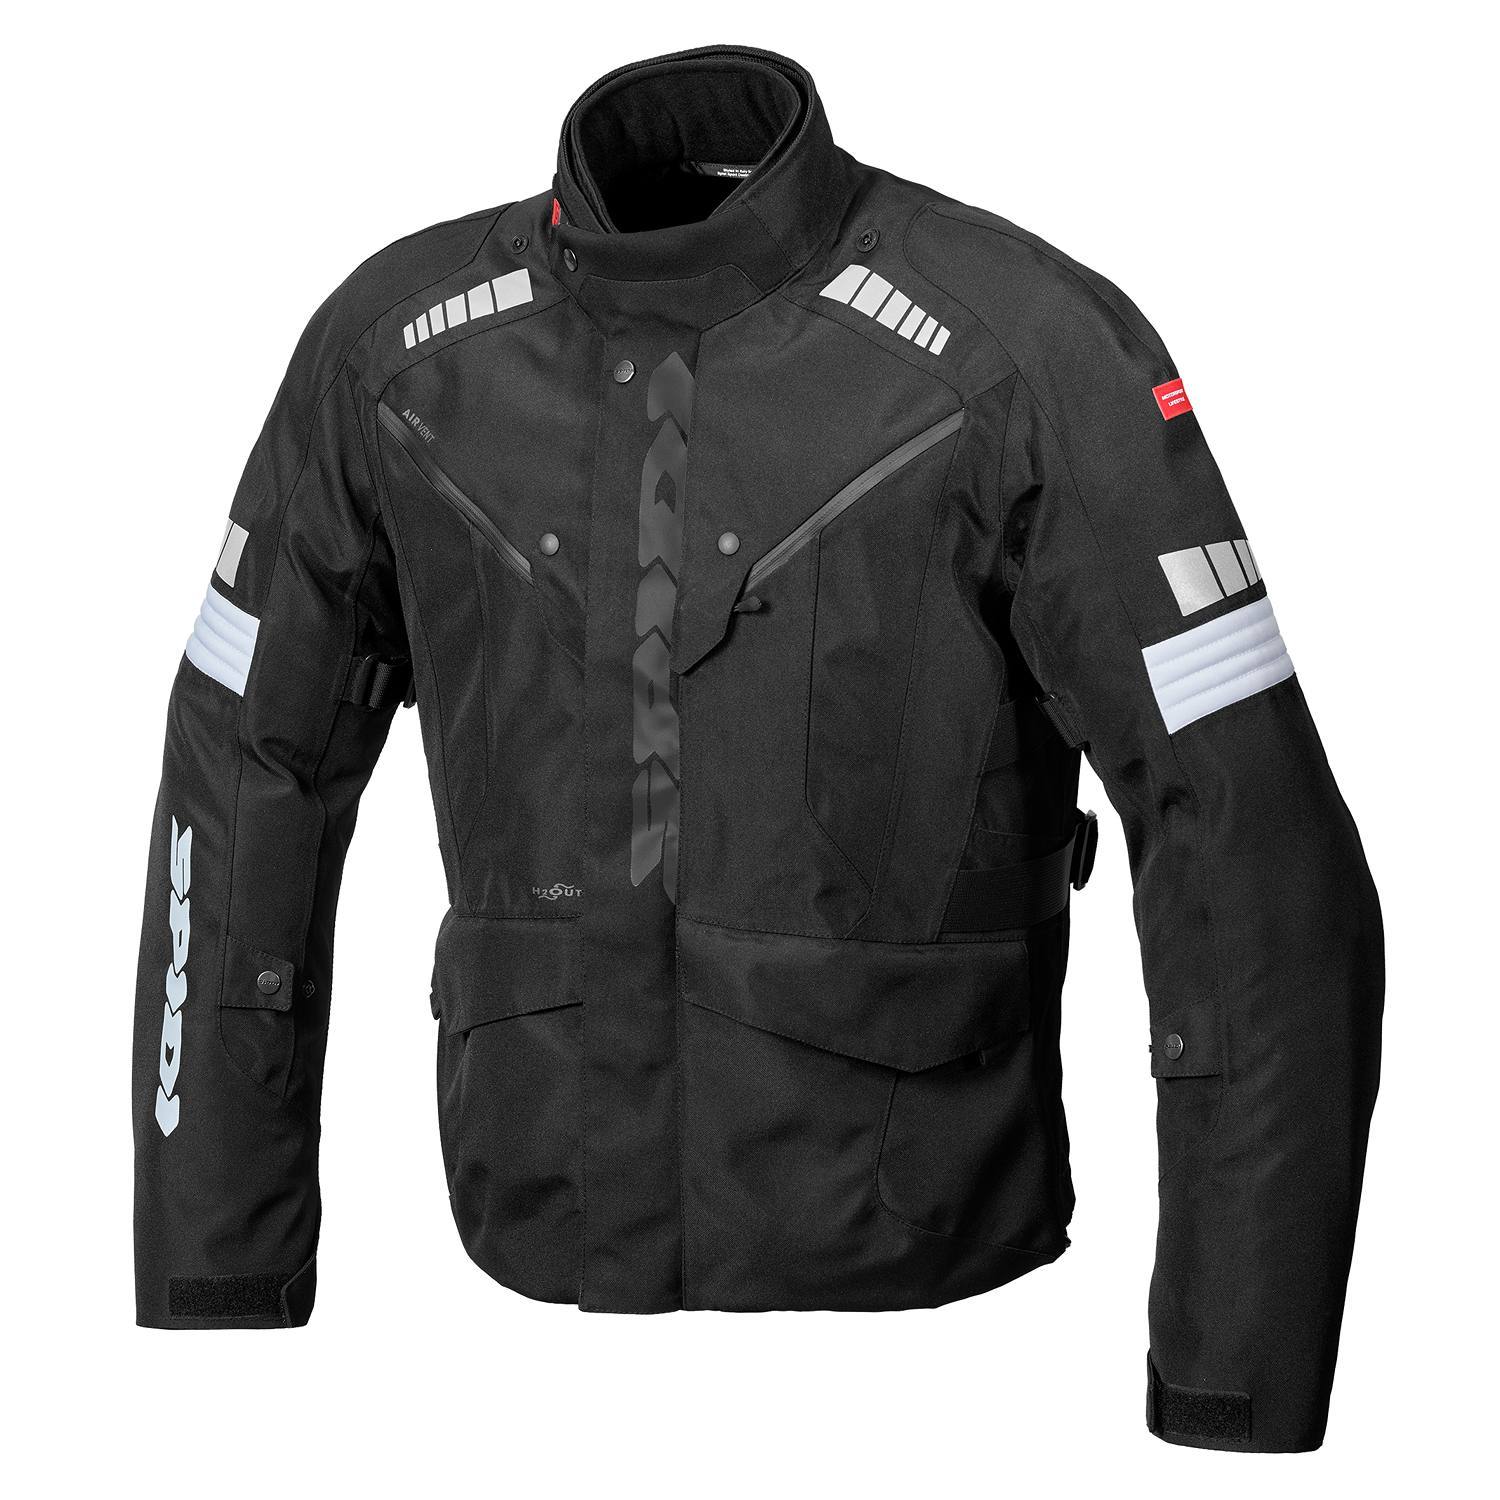 Image of Spidi Outlander Robust H2Out Jacket Black Size 3XL ID 8030161344196